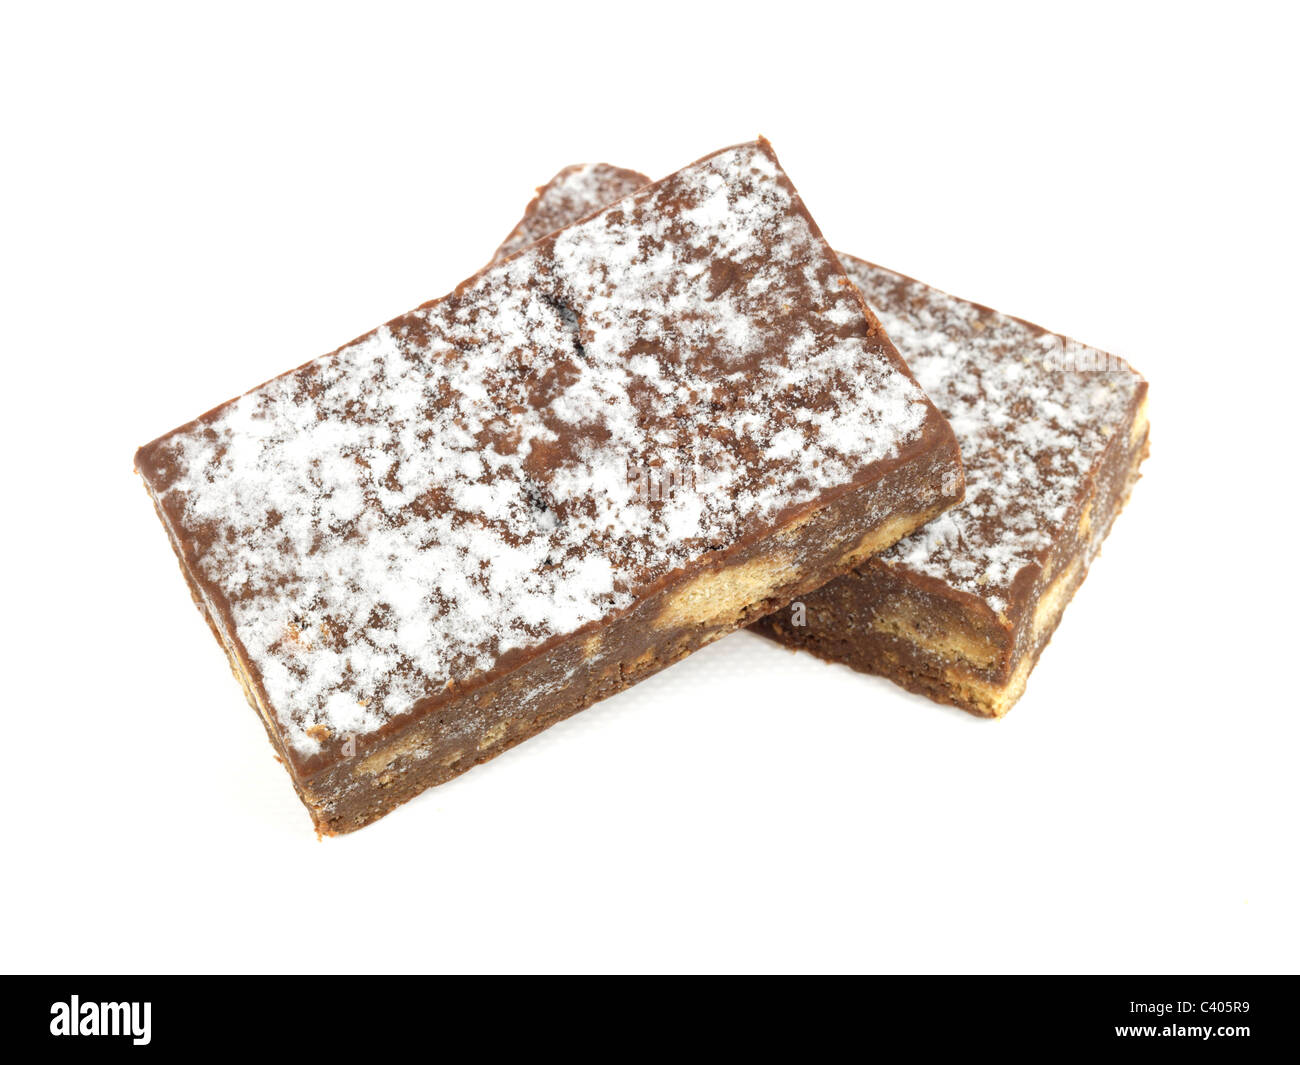 Freshly Made Tasty Chocolate Slice Snacks With No People Against A White Background With A Clipping Path Stock Photo